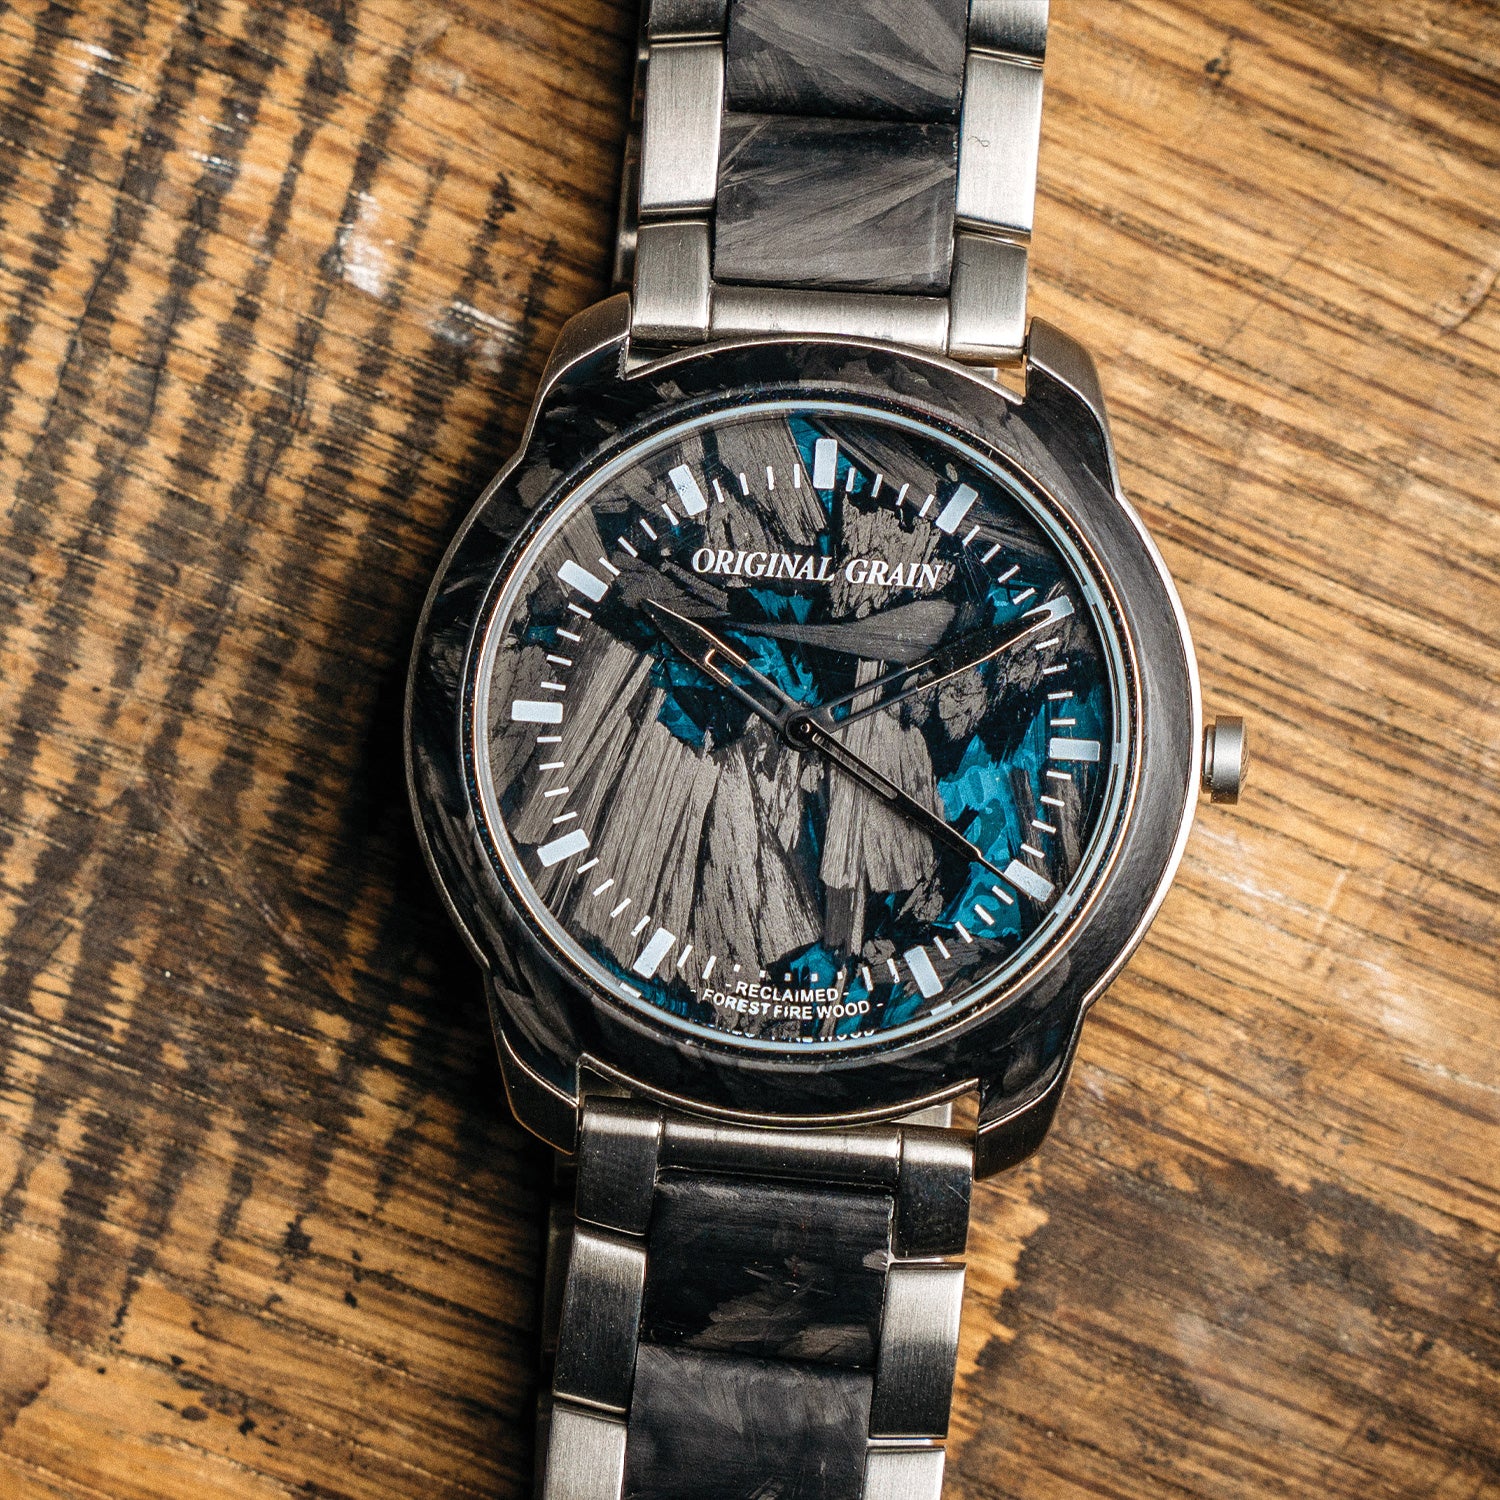 Original Grain] Got this as a gift and I think it's pretty cool. Your  thoughts? : r/Watches